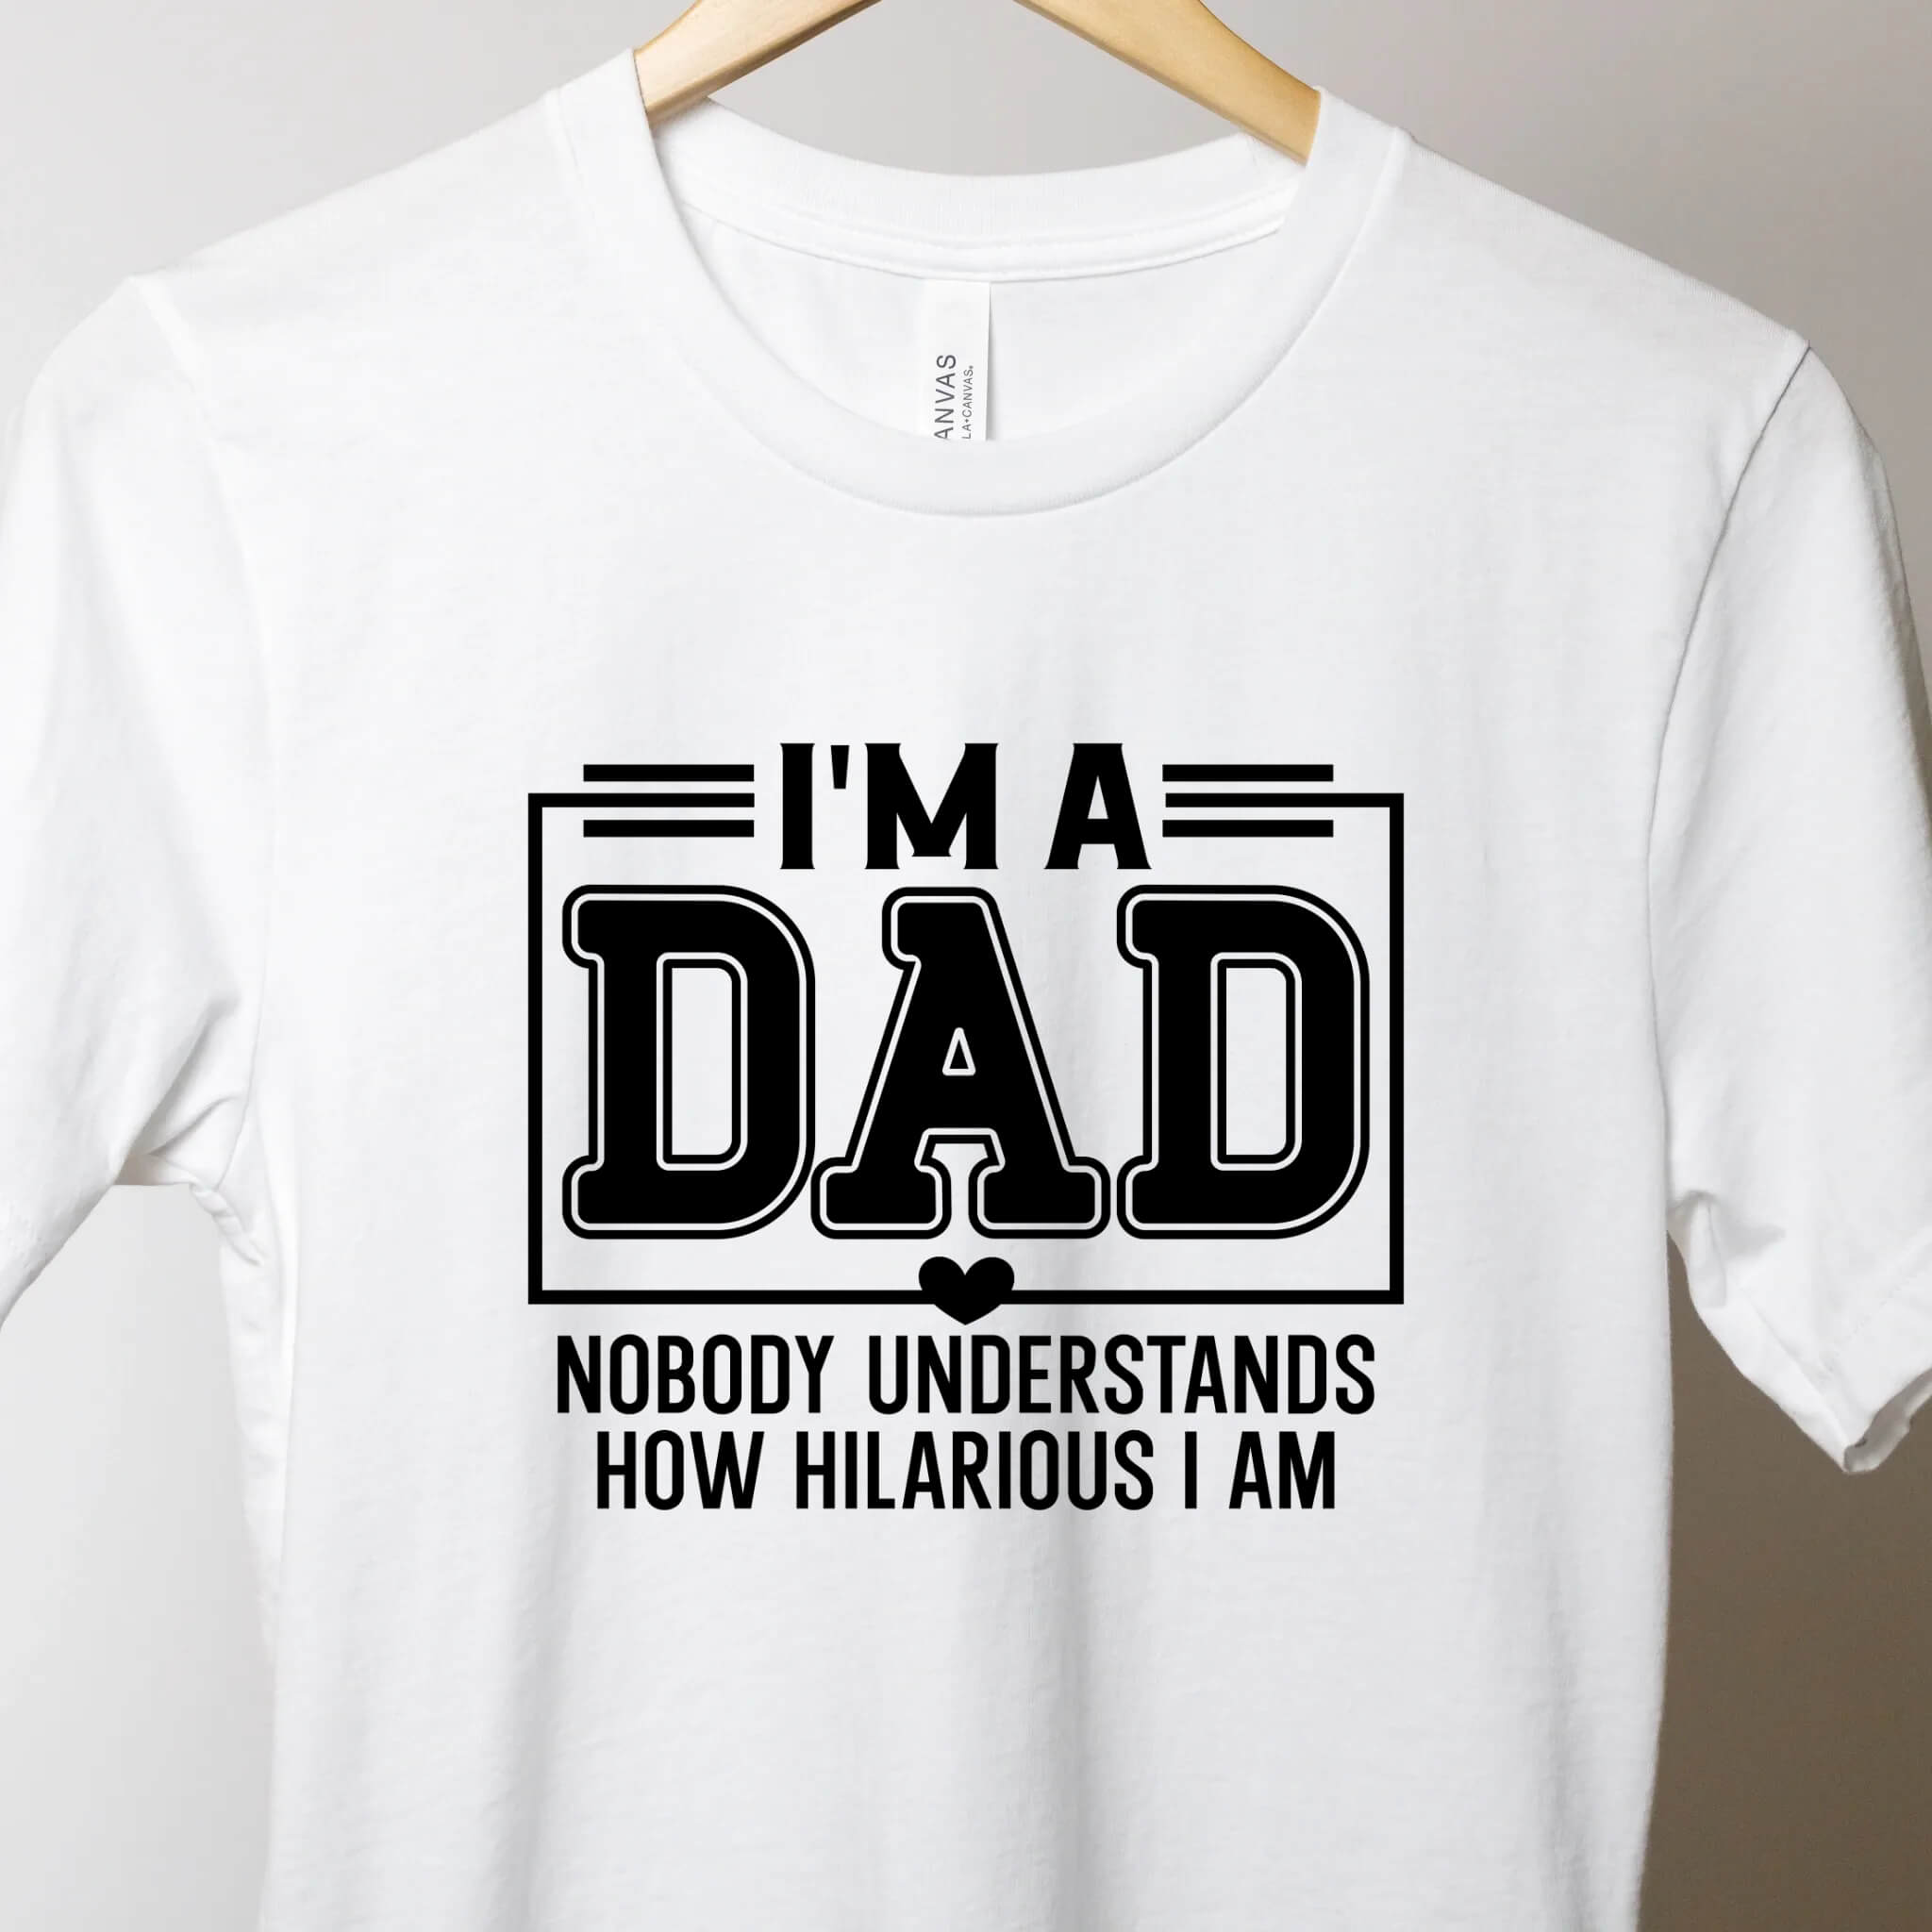 I'm A Dad Nobody Understands How Hilarious I Am T-Shirt Jokester Dad Birthday Christmas Father's Day Gift